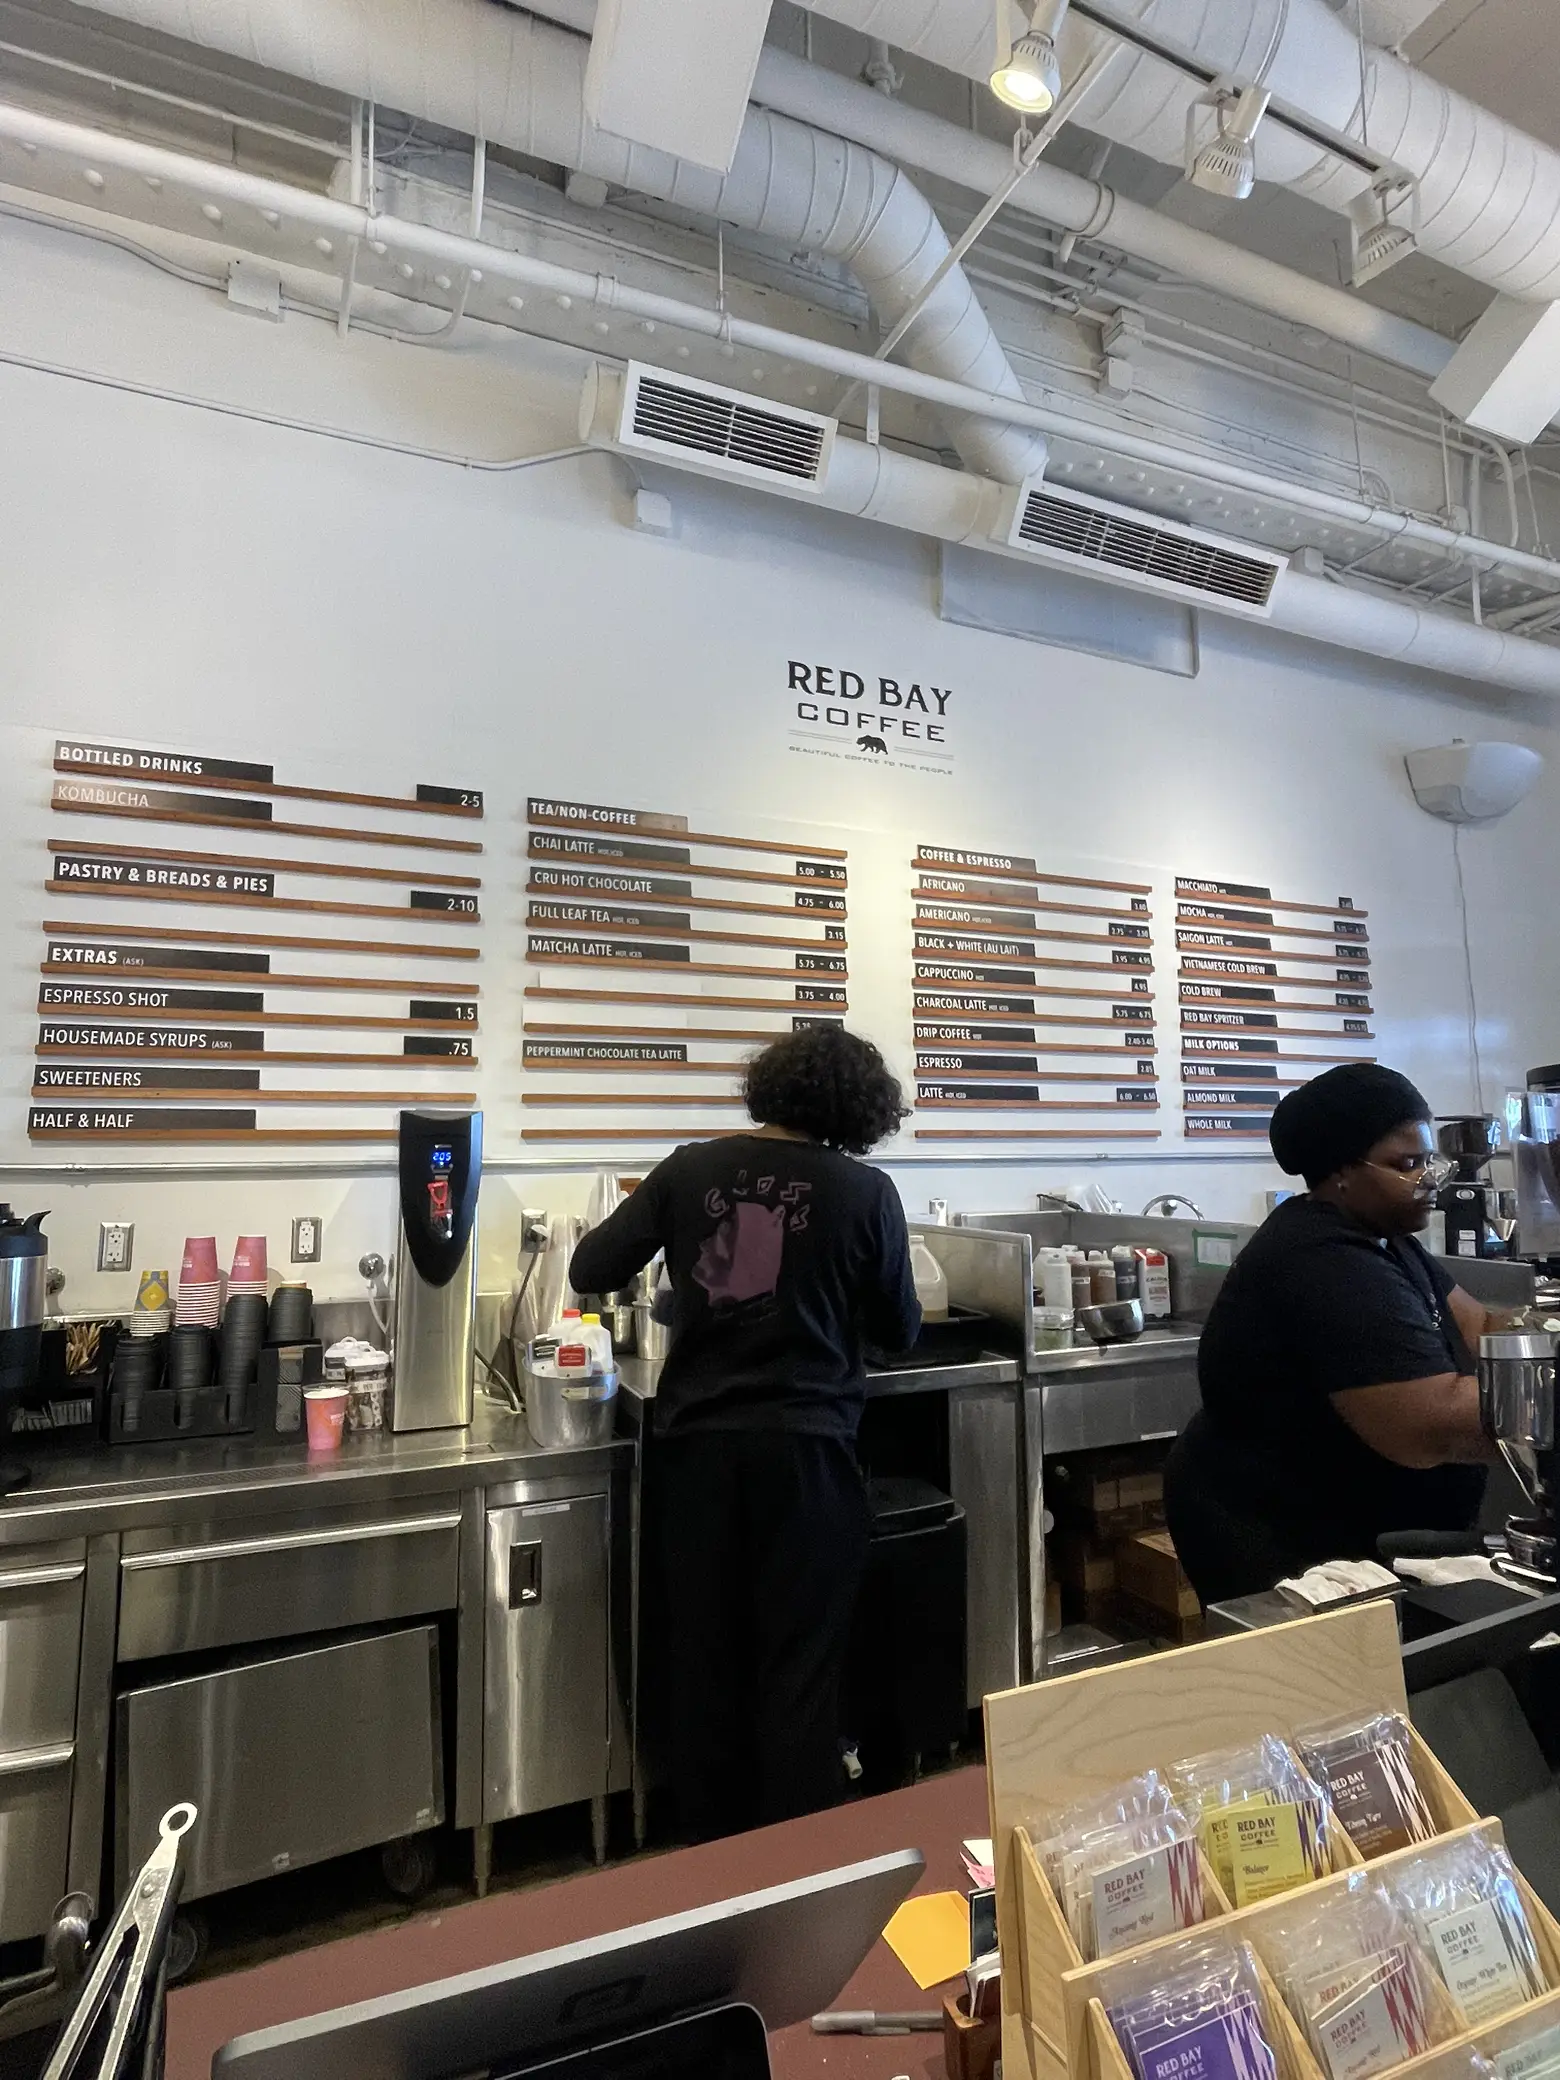 Red Bay Coffee, San Francisco, Gallery posted by Jackie